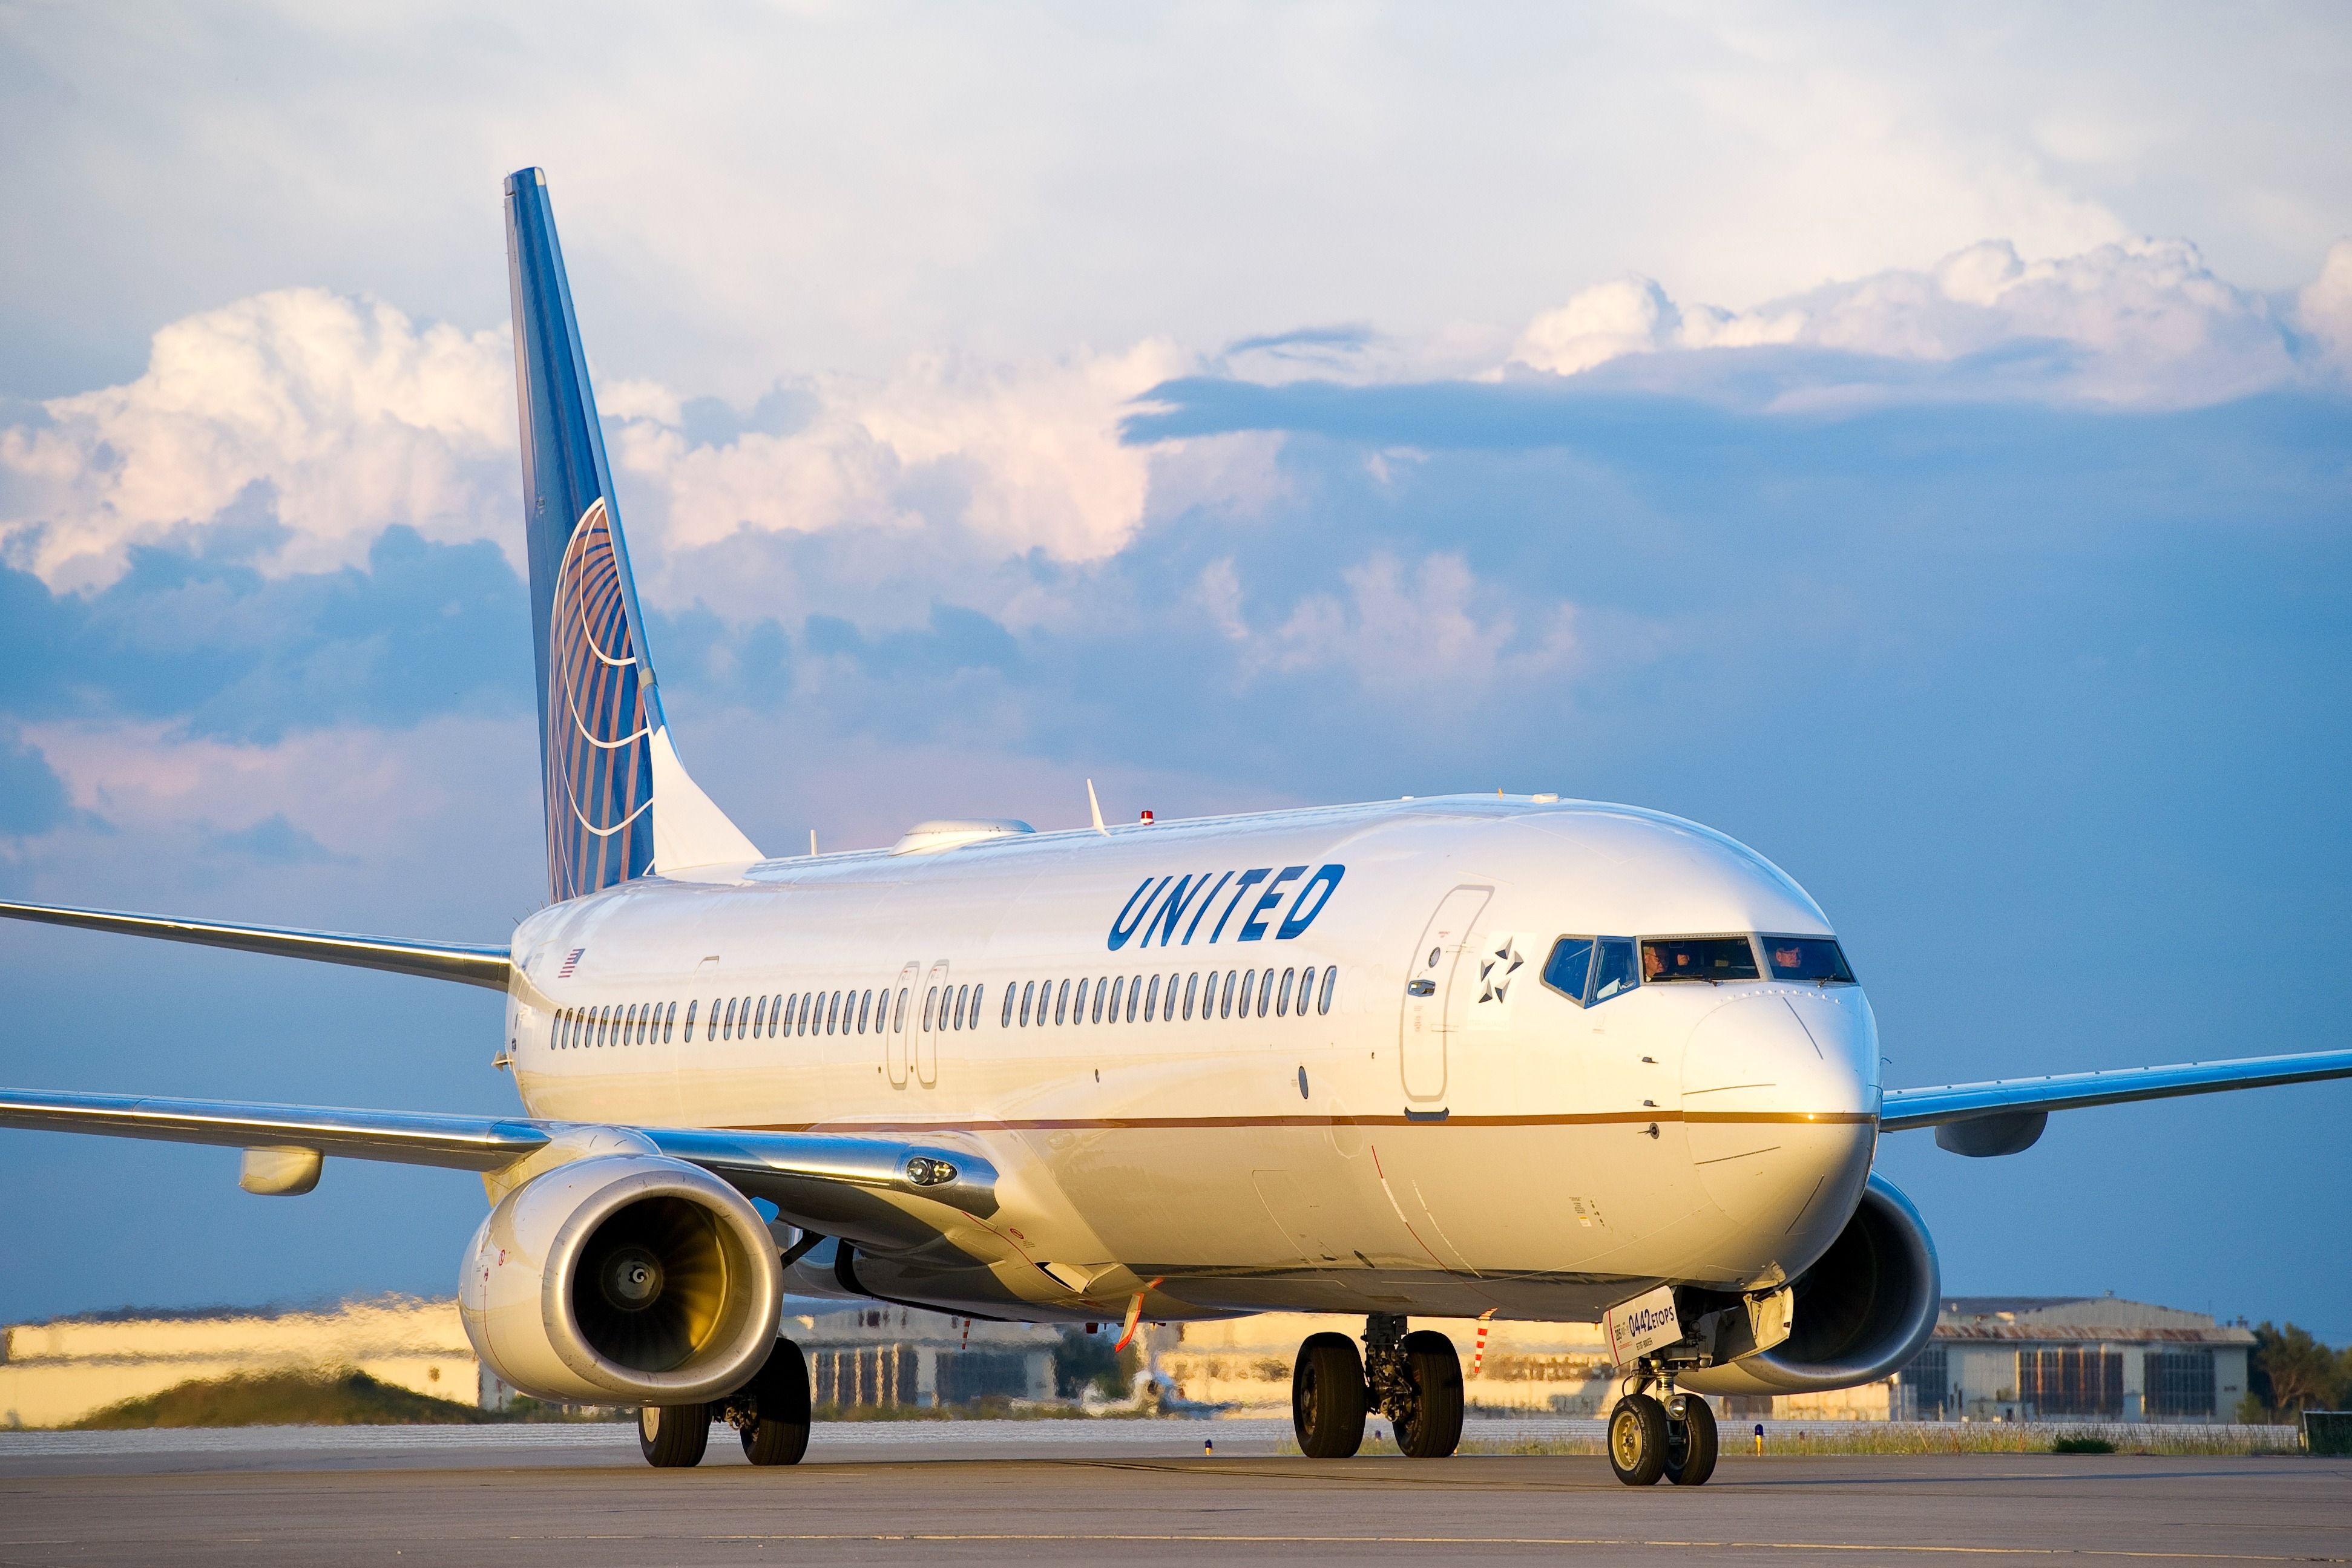 A United Airlines Boeing 737 taxiing.